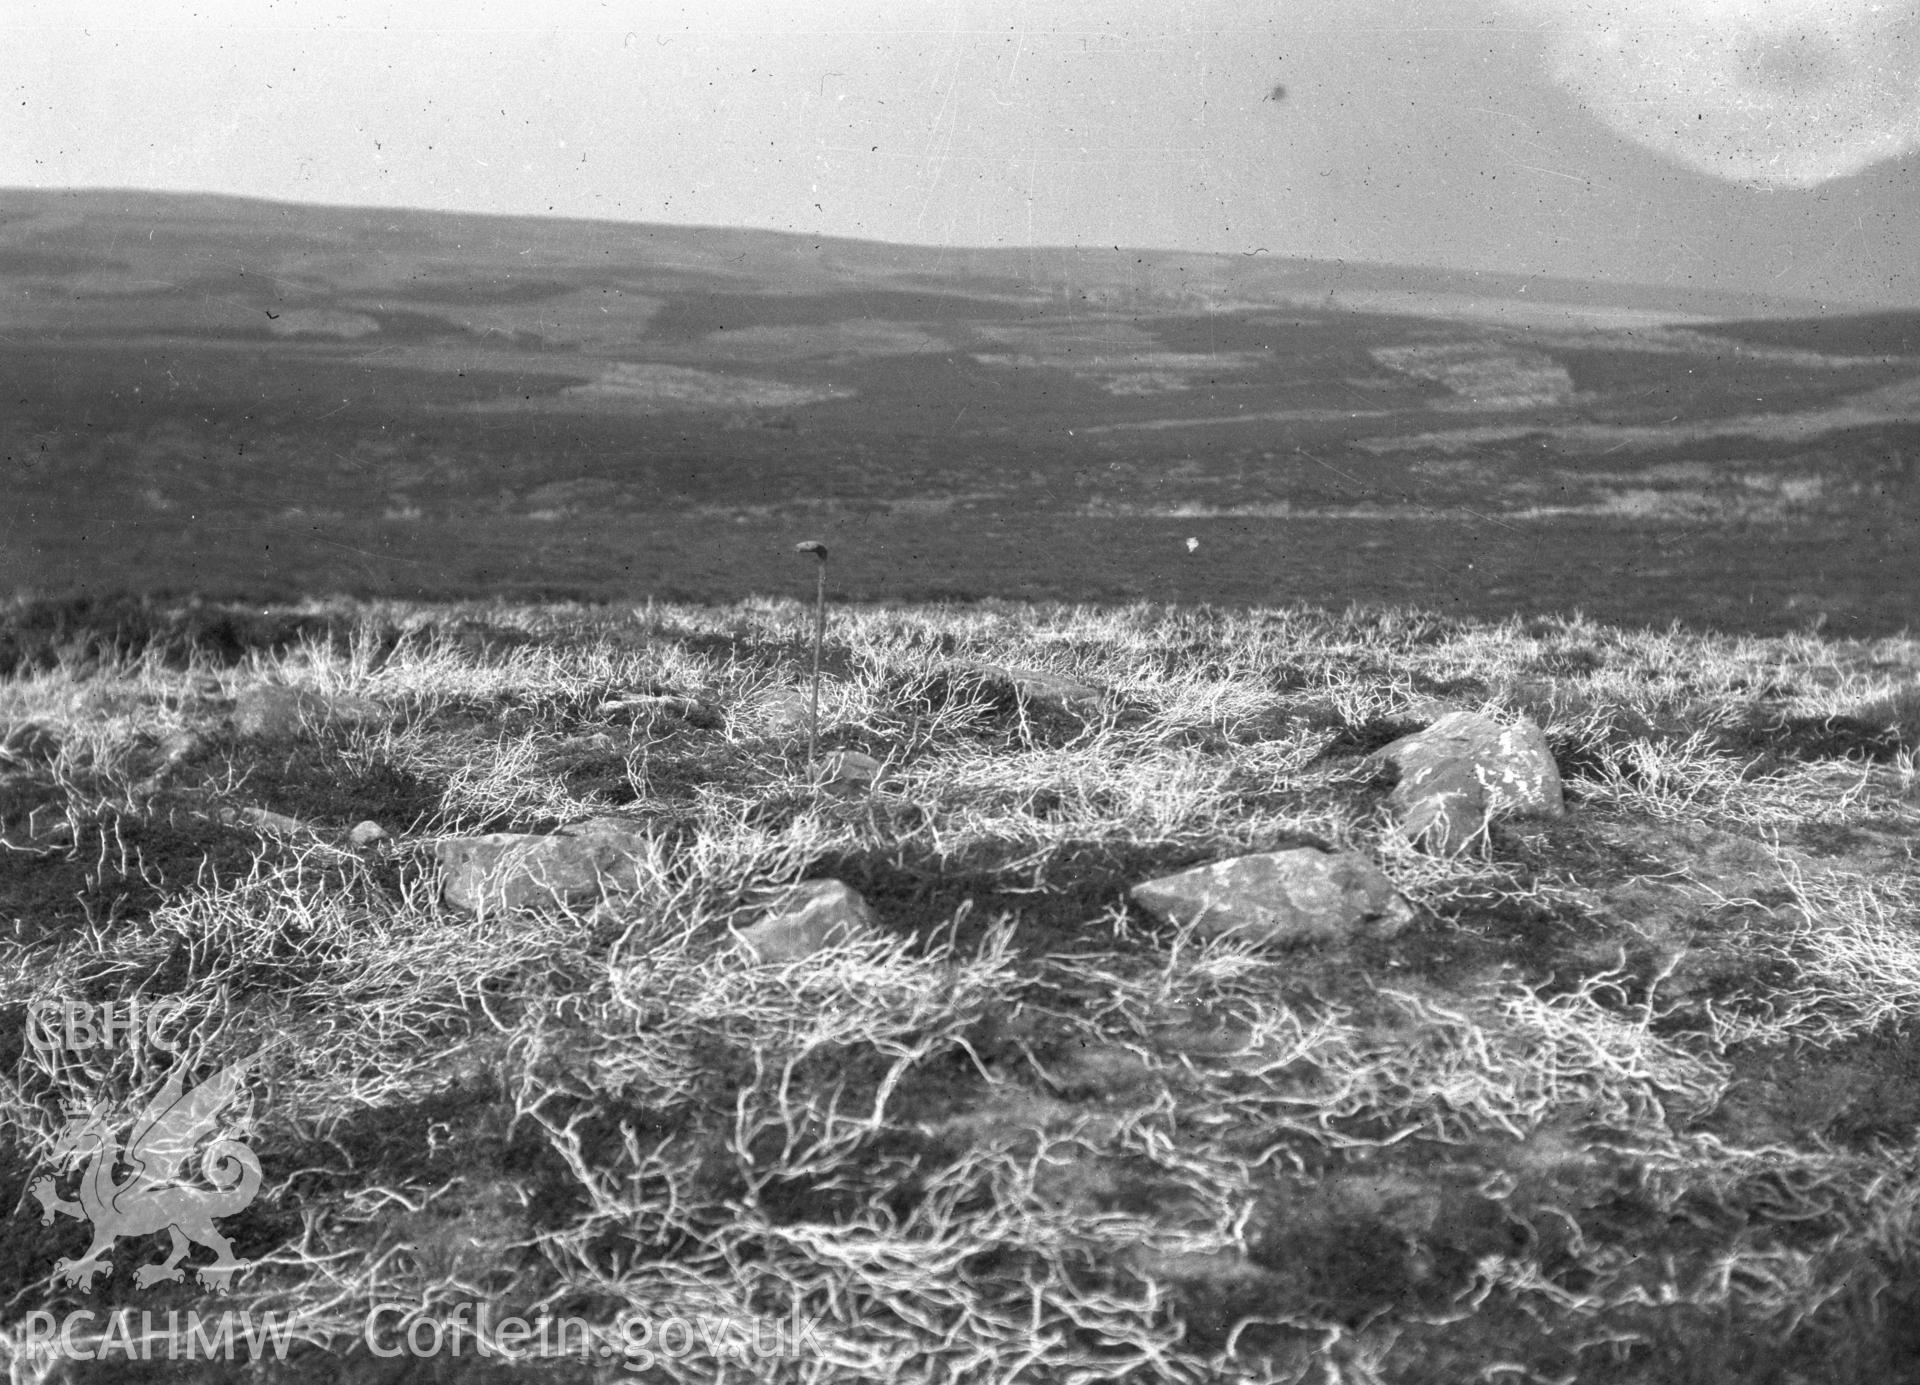 Digital copy of a nitrate negative showing Bryn Beddau round barrows. Back of negative copy dates the photograph to 'July 1930.' From the Cadw Monuments in Care Collection.